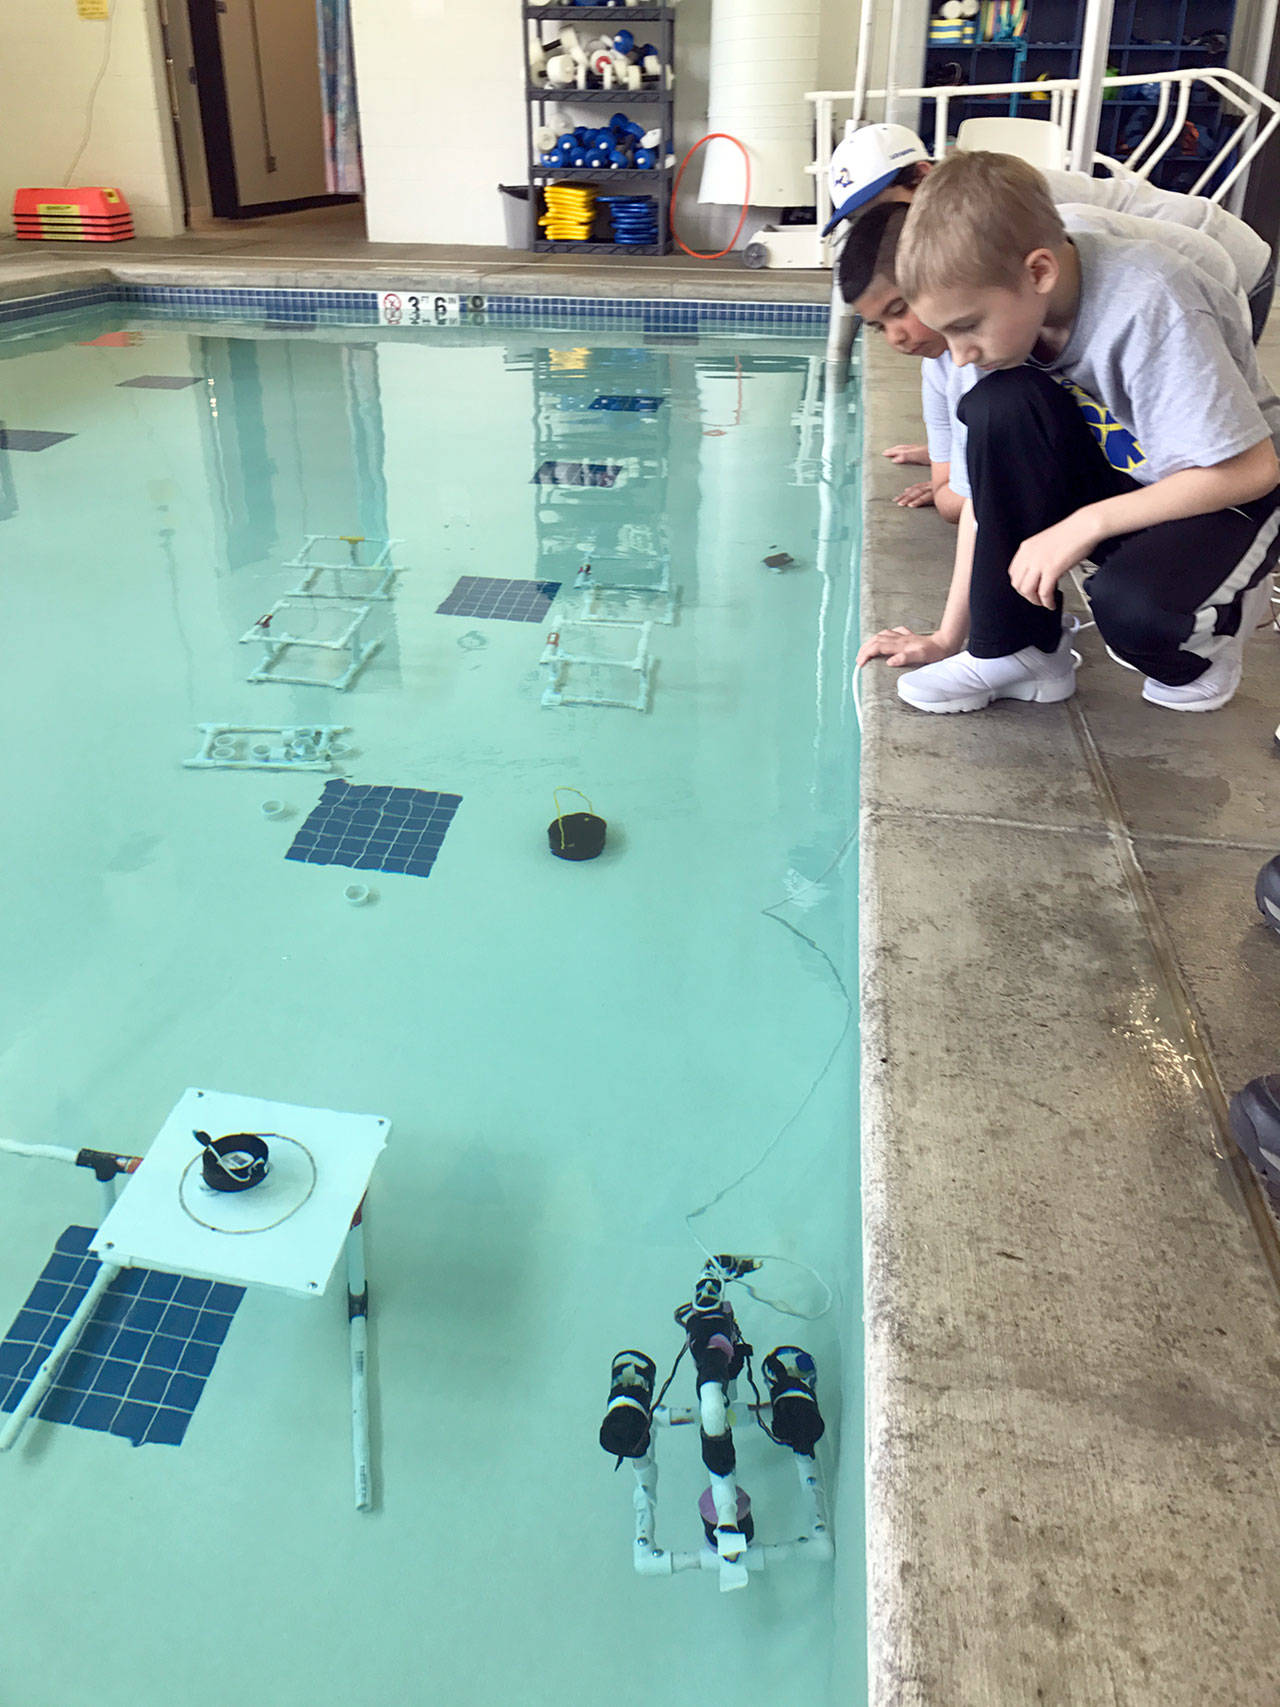 Students peer into the water at the Forks Athletic and Aquatic Center’s pool at a remote-operated vehicle during the MATE ROV competition. (Olympic Coast National Marine Sanctuary)